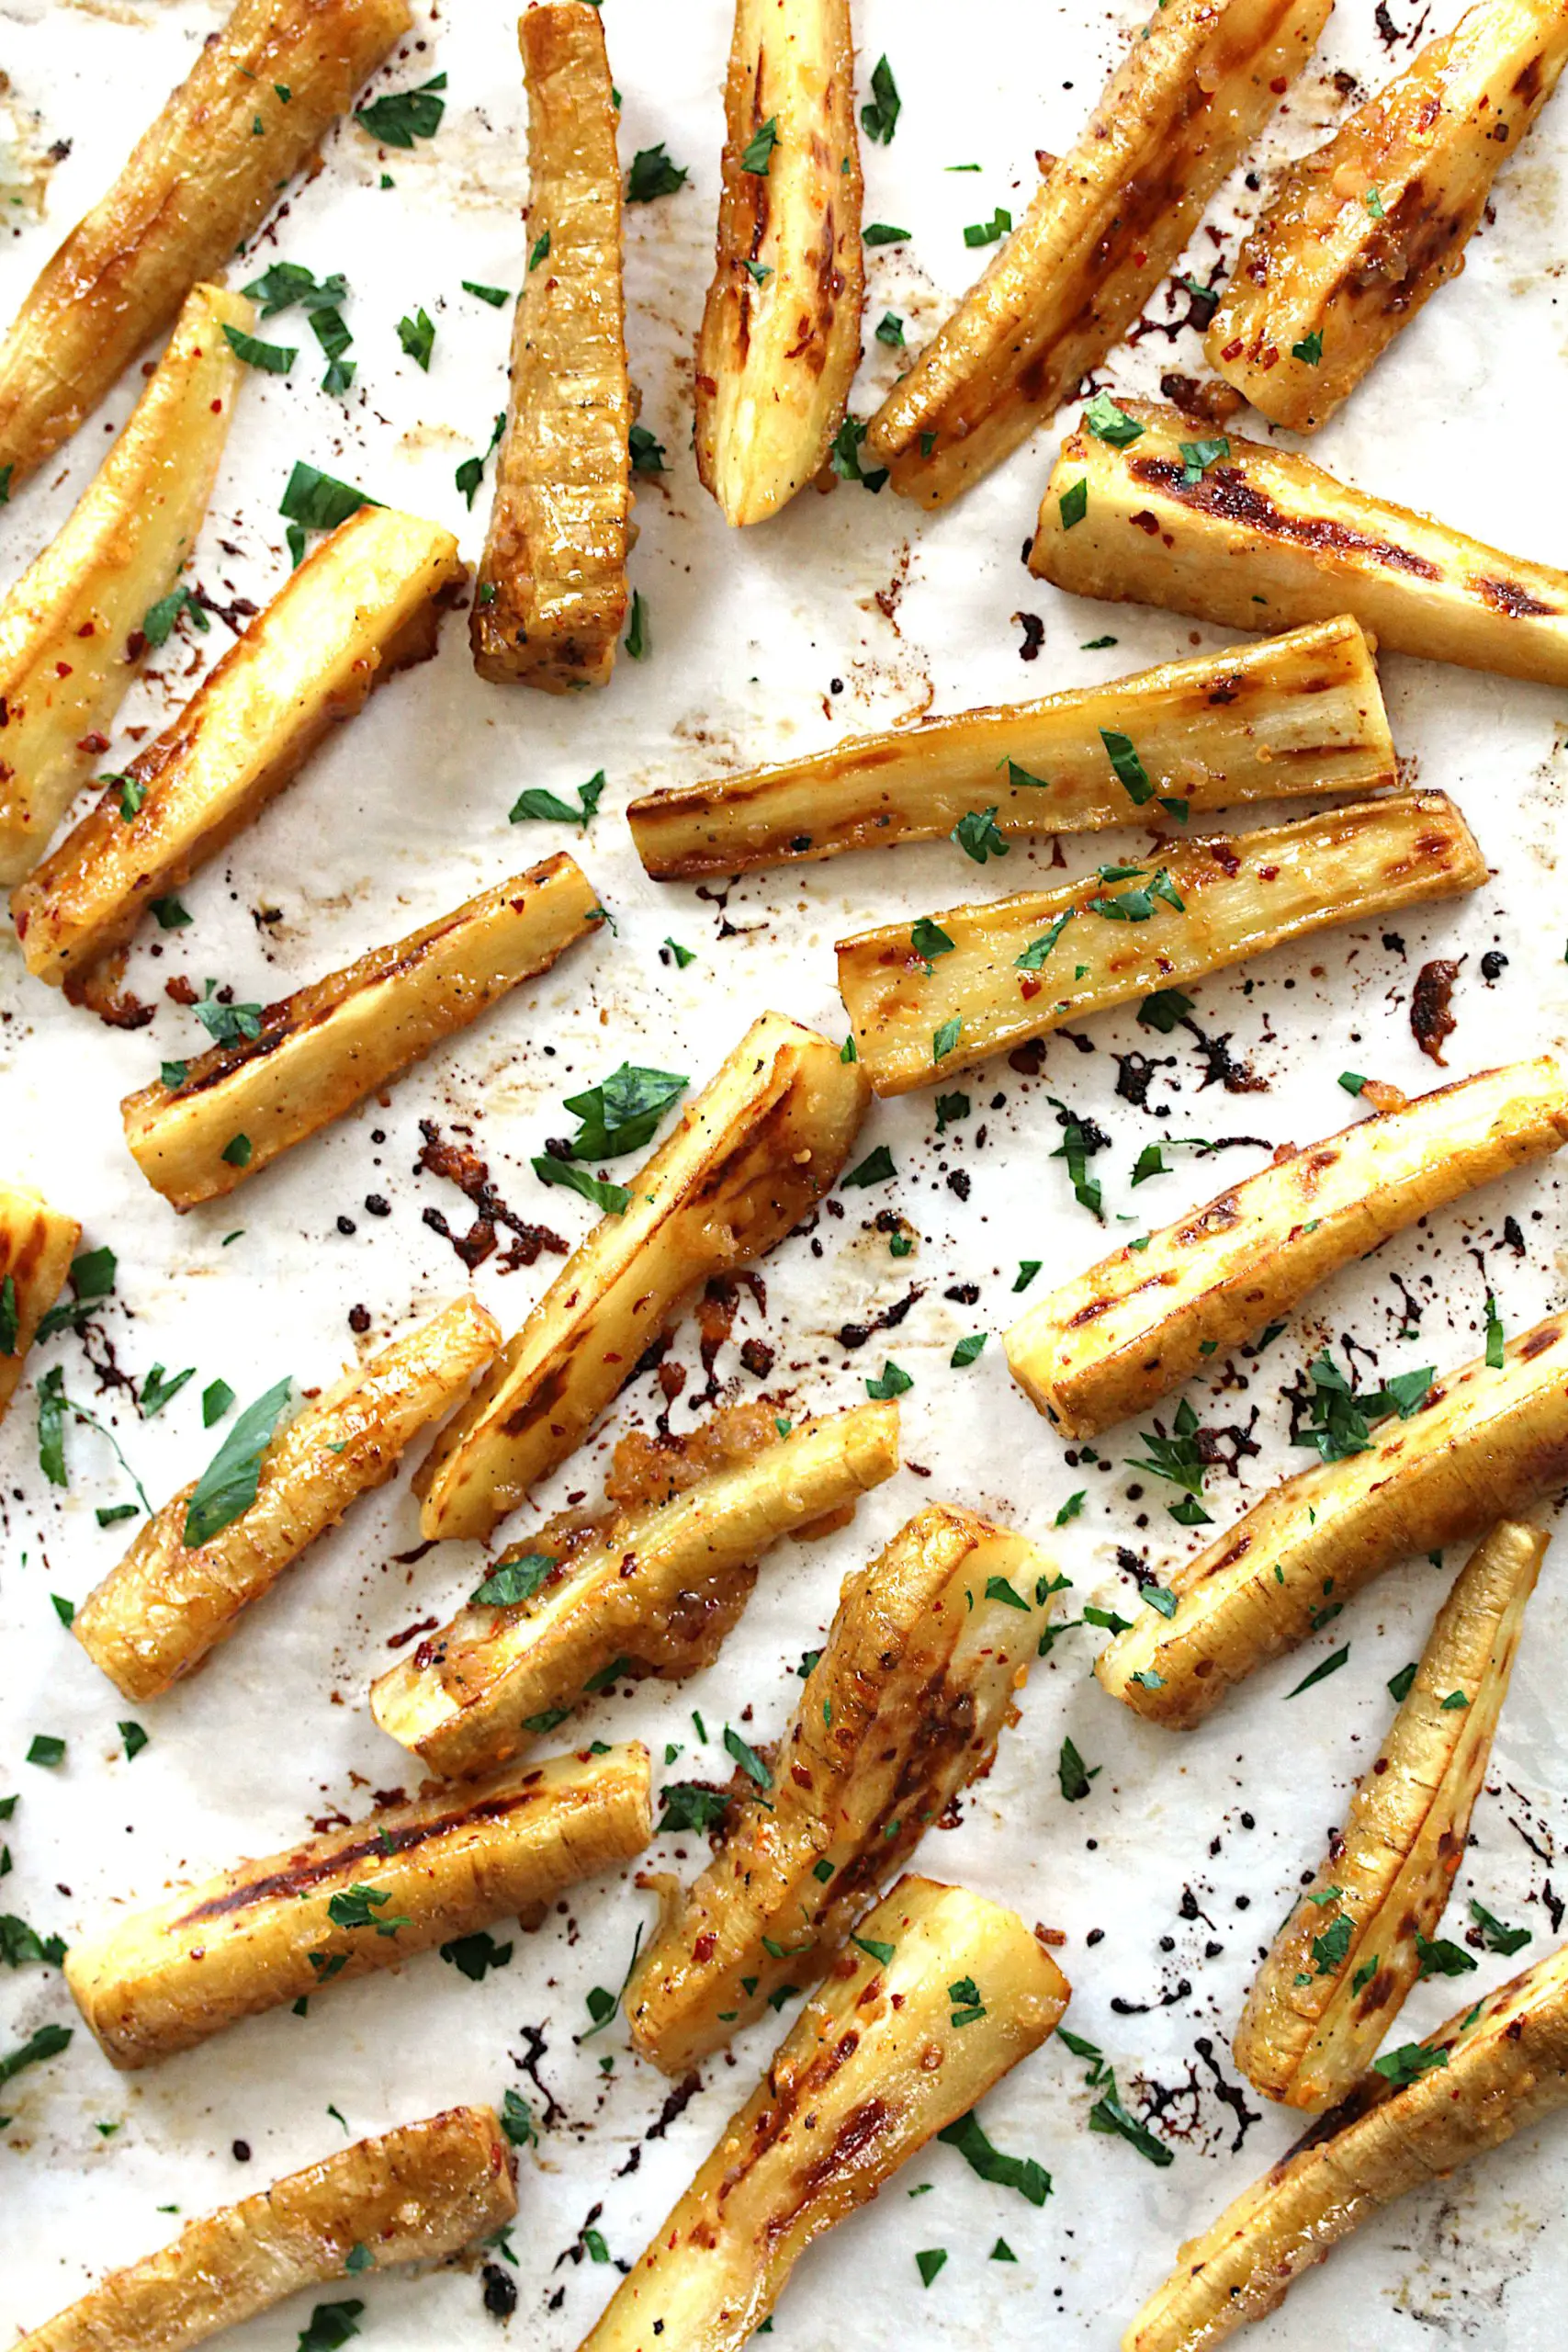 Overhead image of roasted parsnips that are spread out on a baking sheet lined with parchment paper